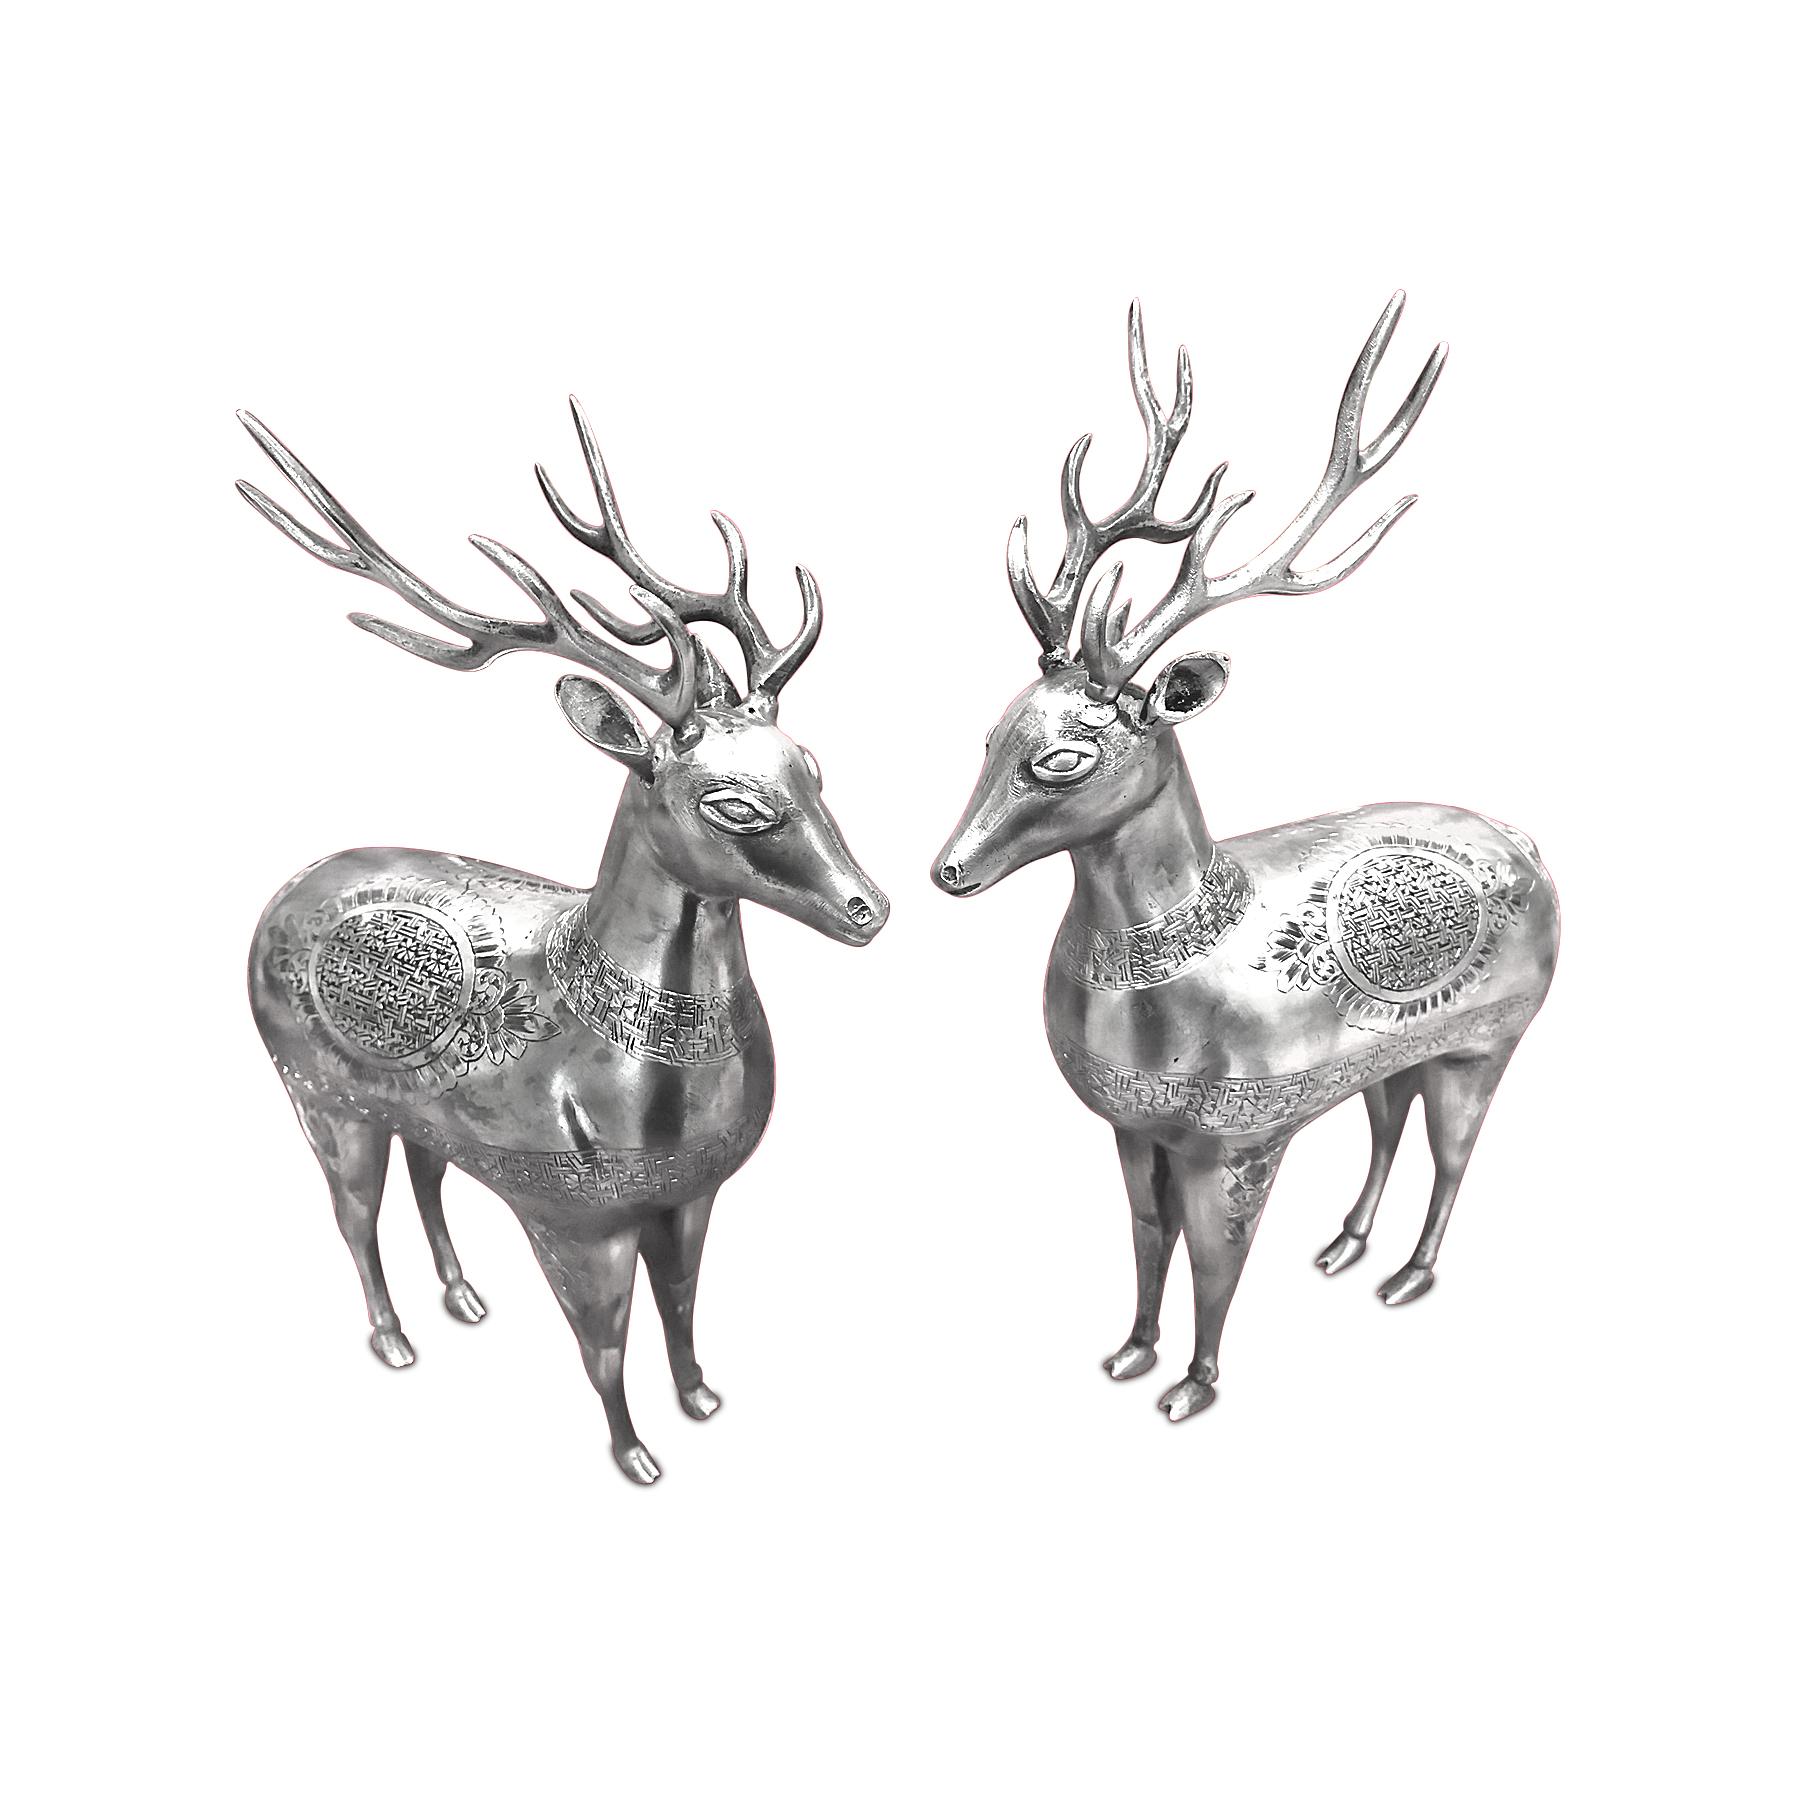 These extremely unique deers 0.84 karot silver. They are very old and unique and beautifully hand carved. 
Weight: 1190 grams
Width:2”
Length :7”
Height :10”